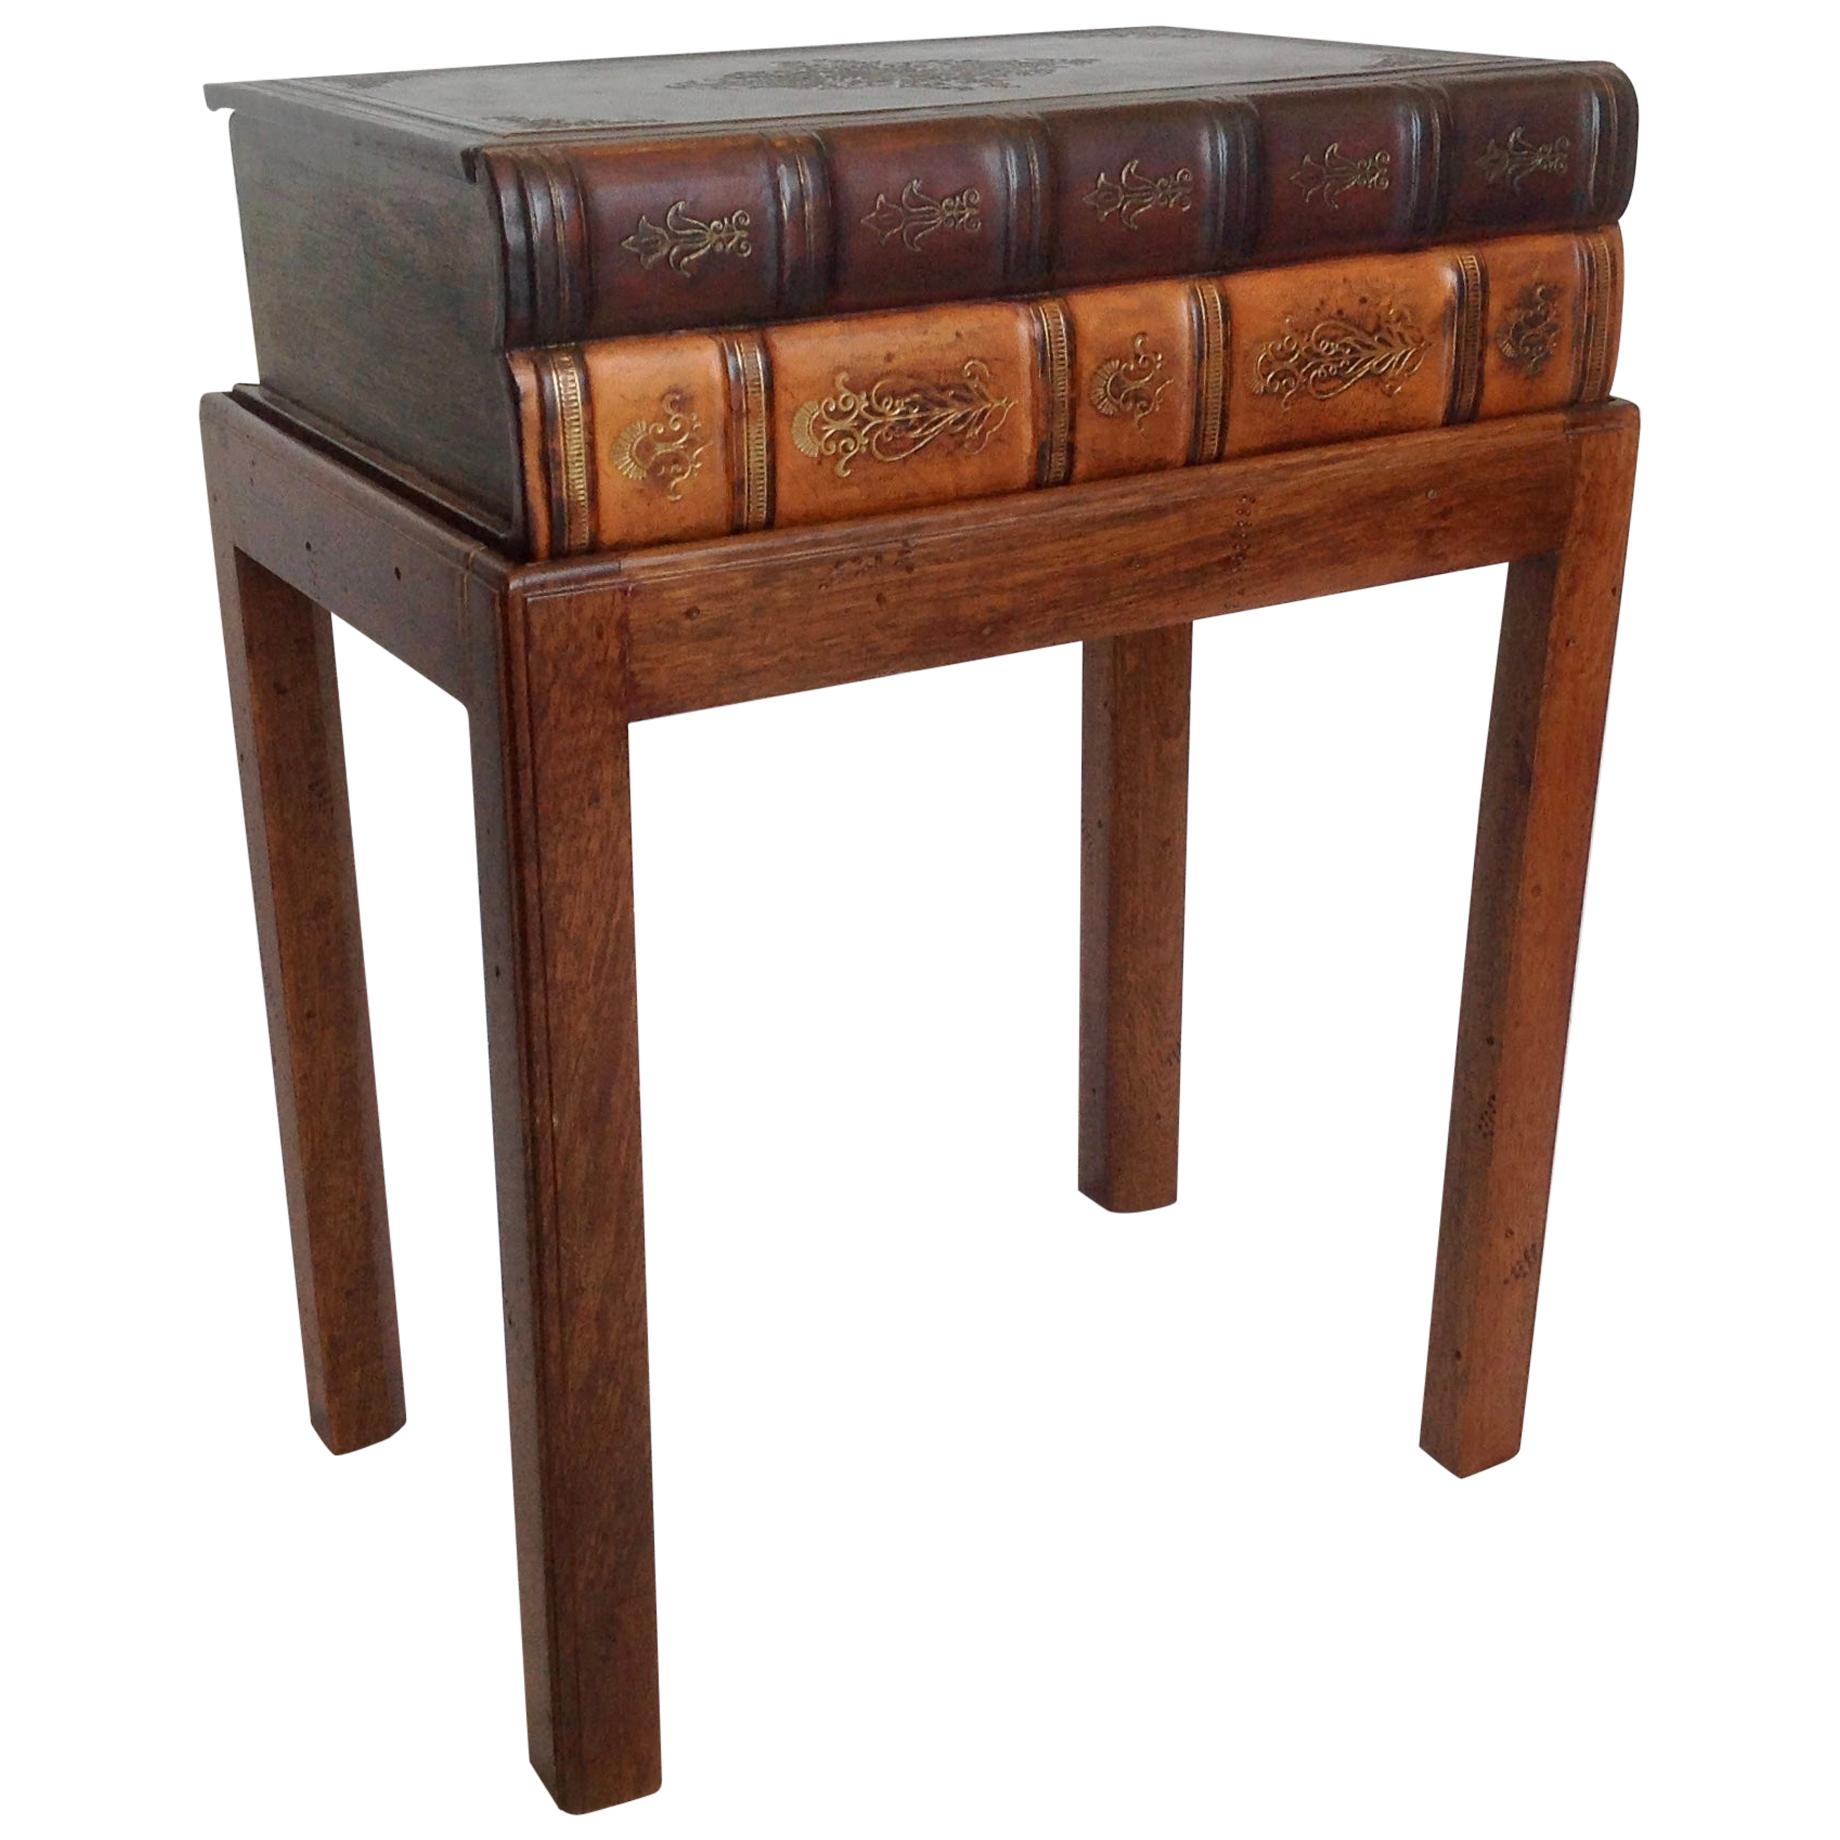 Maitland Smith Book Form Side Table